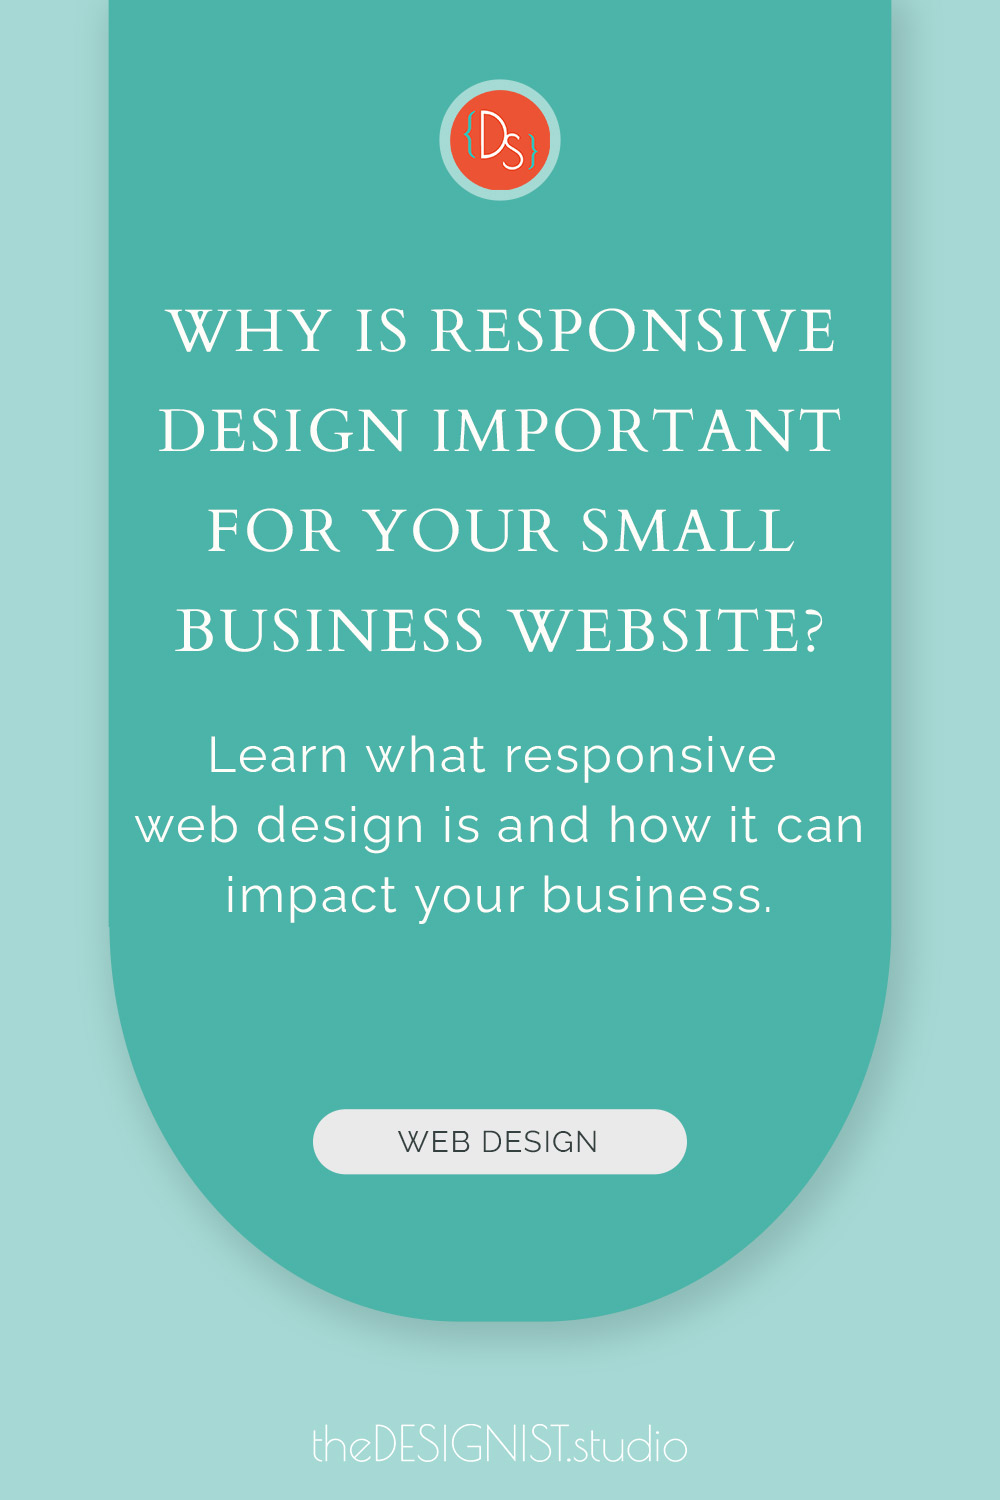 Why is responsive design important for your small business website?